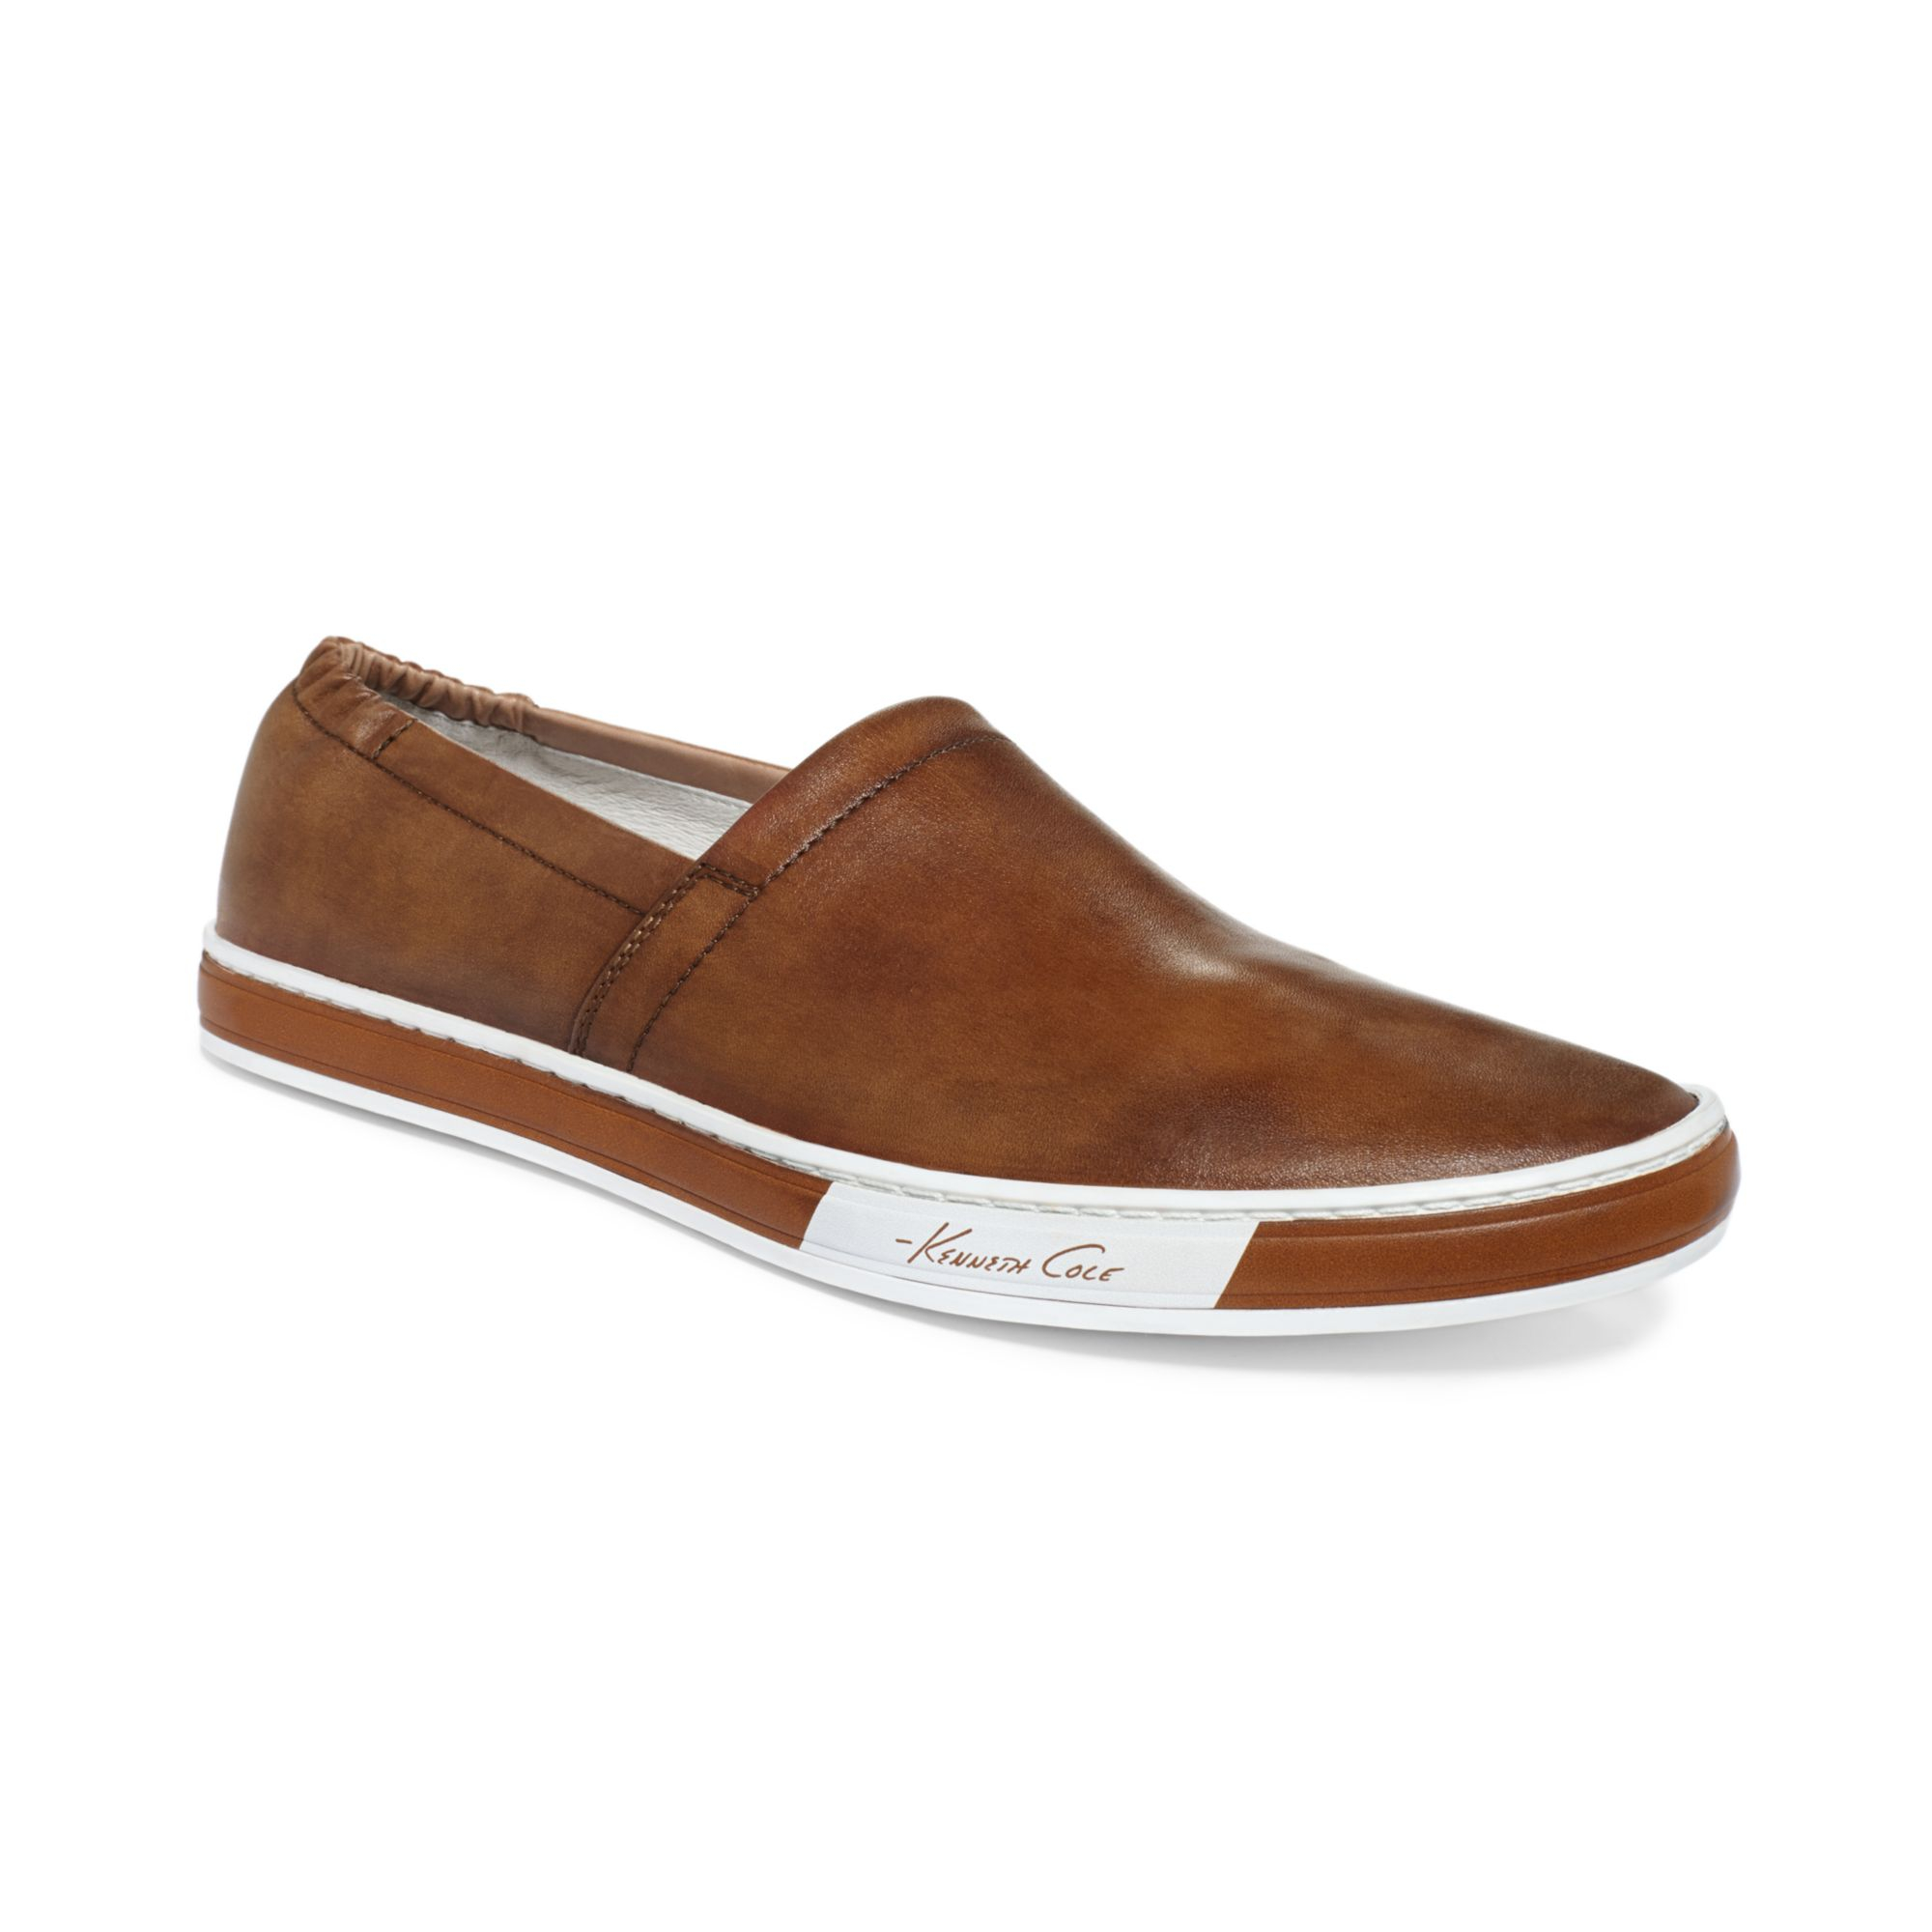 Lyst - Kenneth Cole Solid Brands Smooth Loafers in Brown for Men